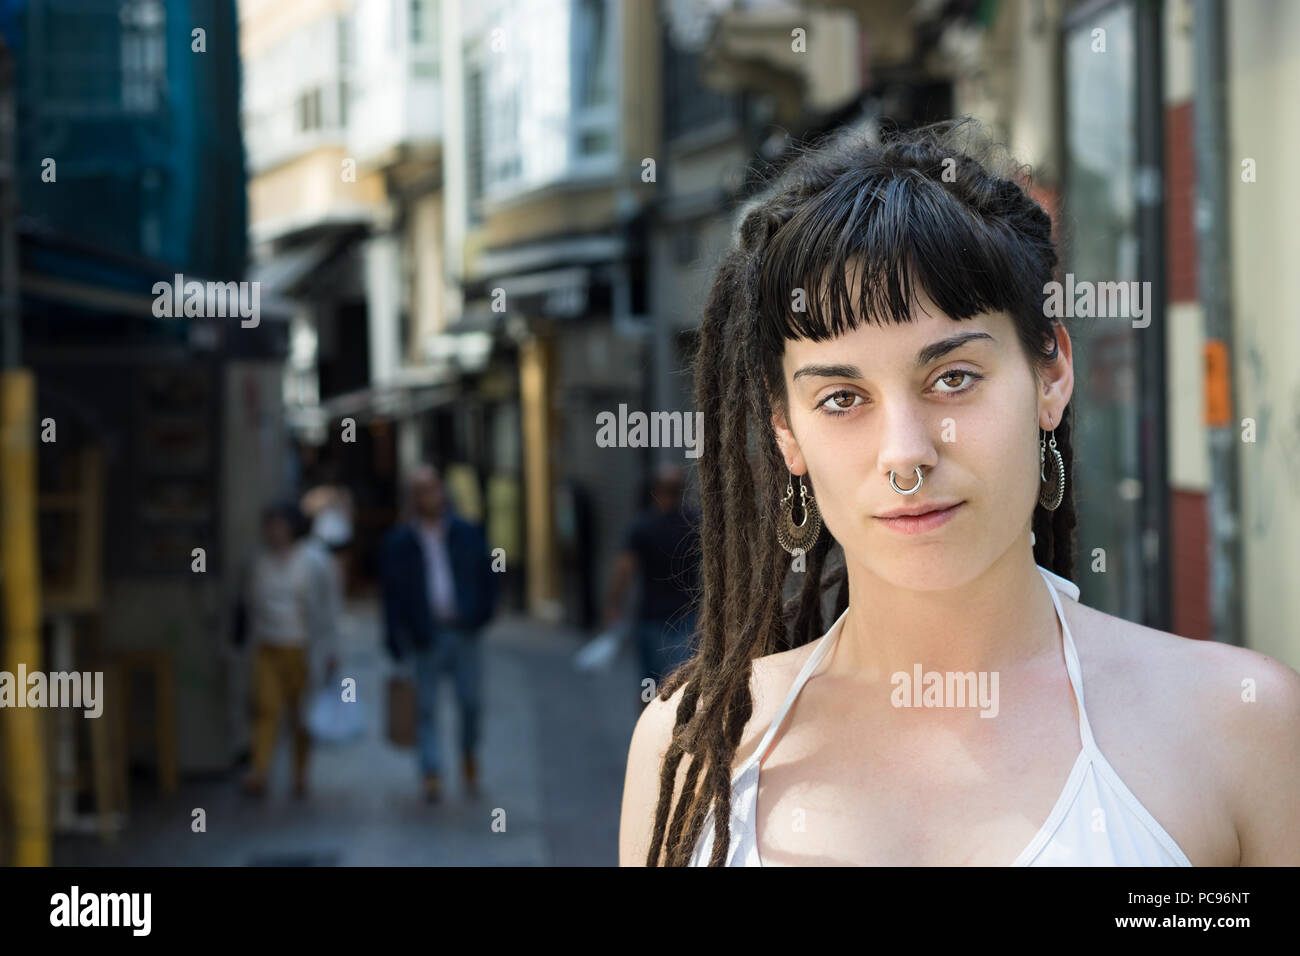 La Coruña, Spain - July 13th, 2018: Portrait of a local young woman in the street with rastafarian look, dreadlocks and a piercing in the nose. Stock Photo